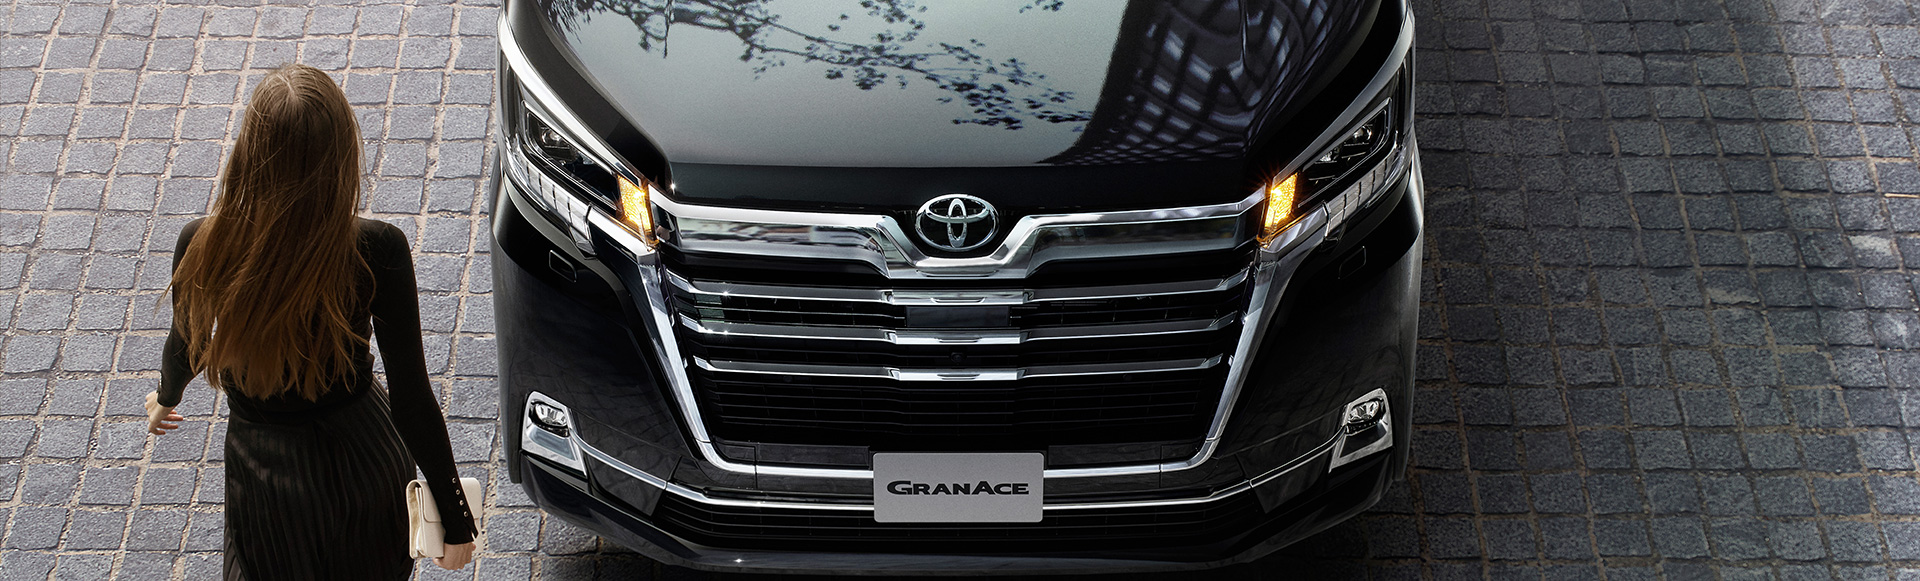 Toyota to Launch New Model Granace in Japan